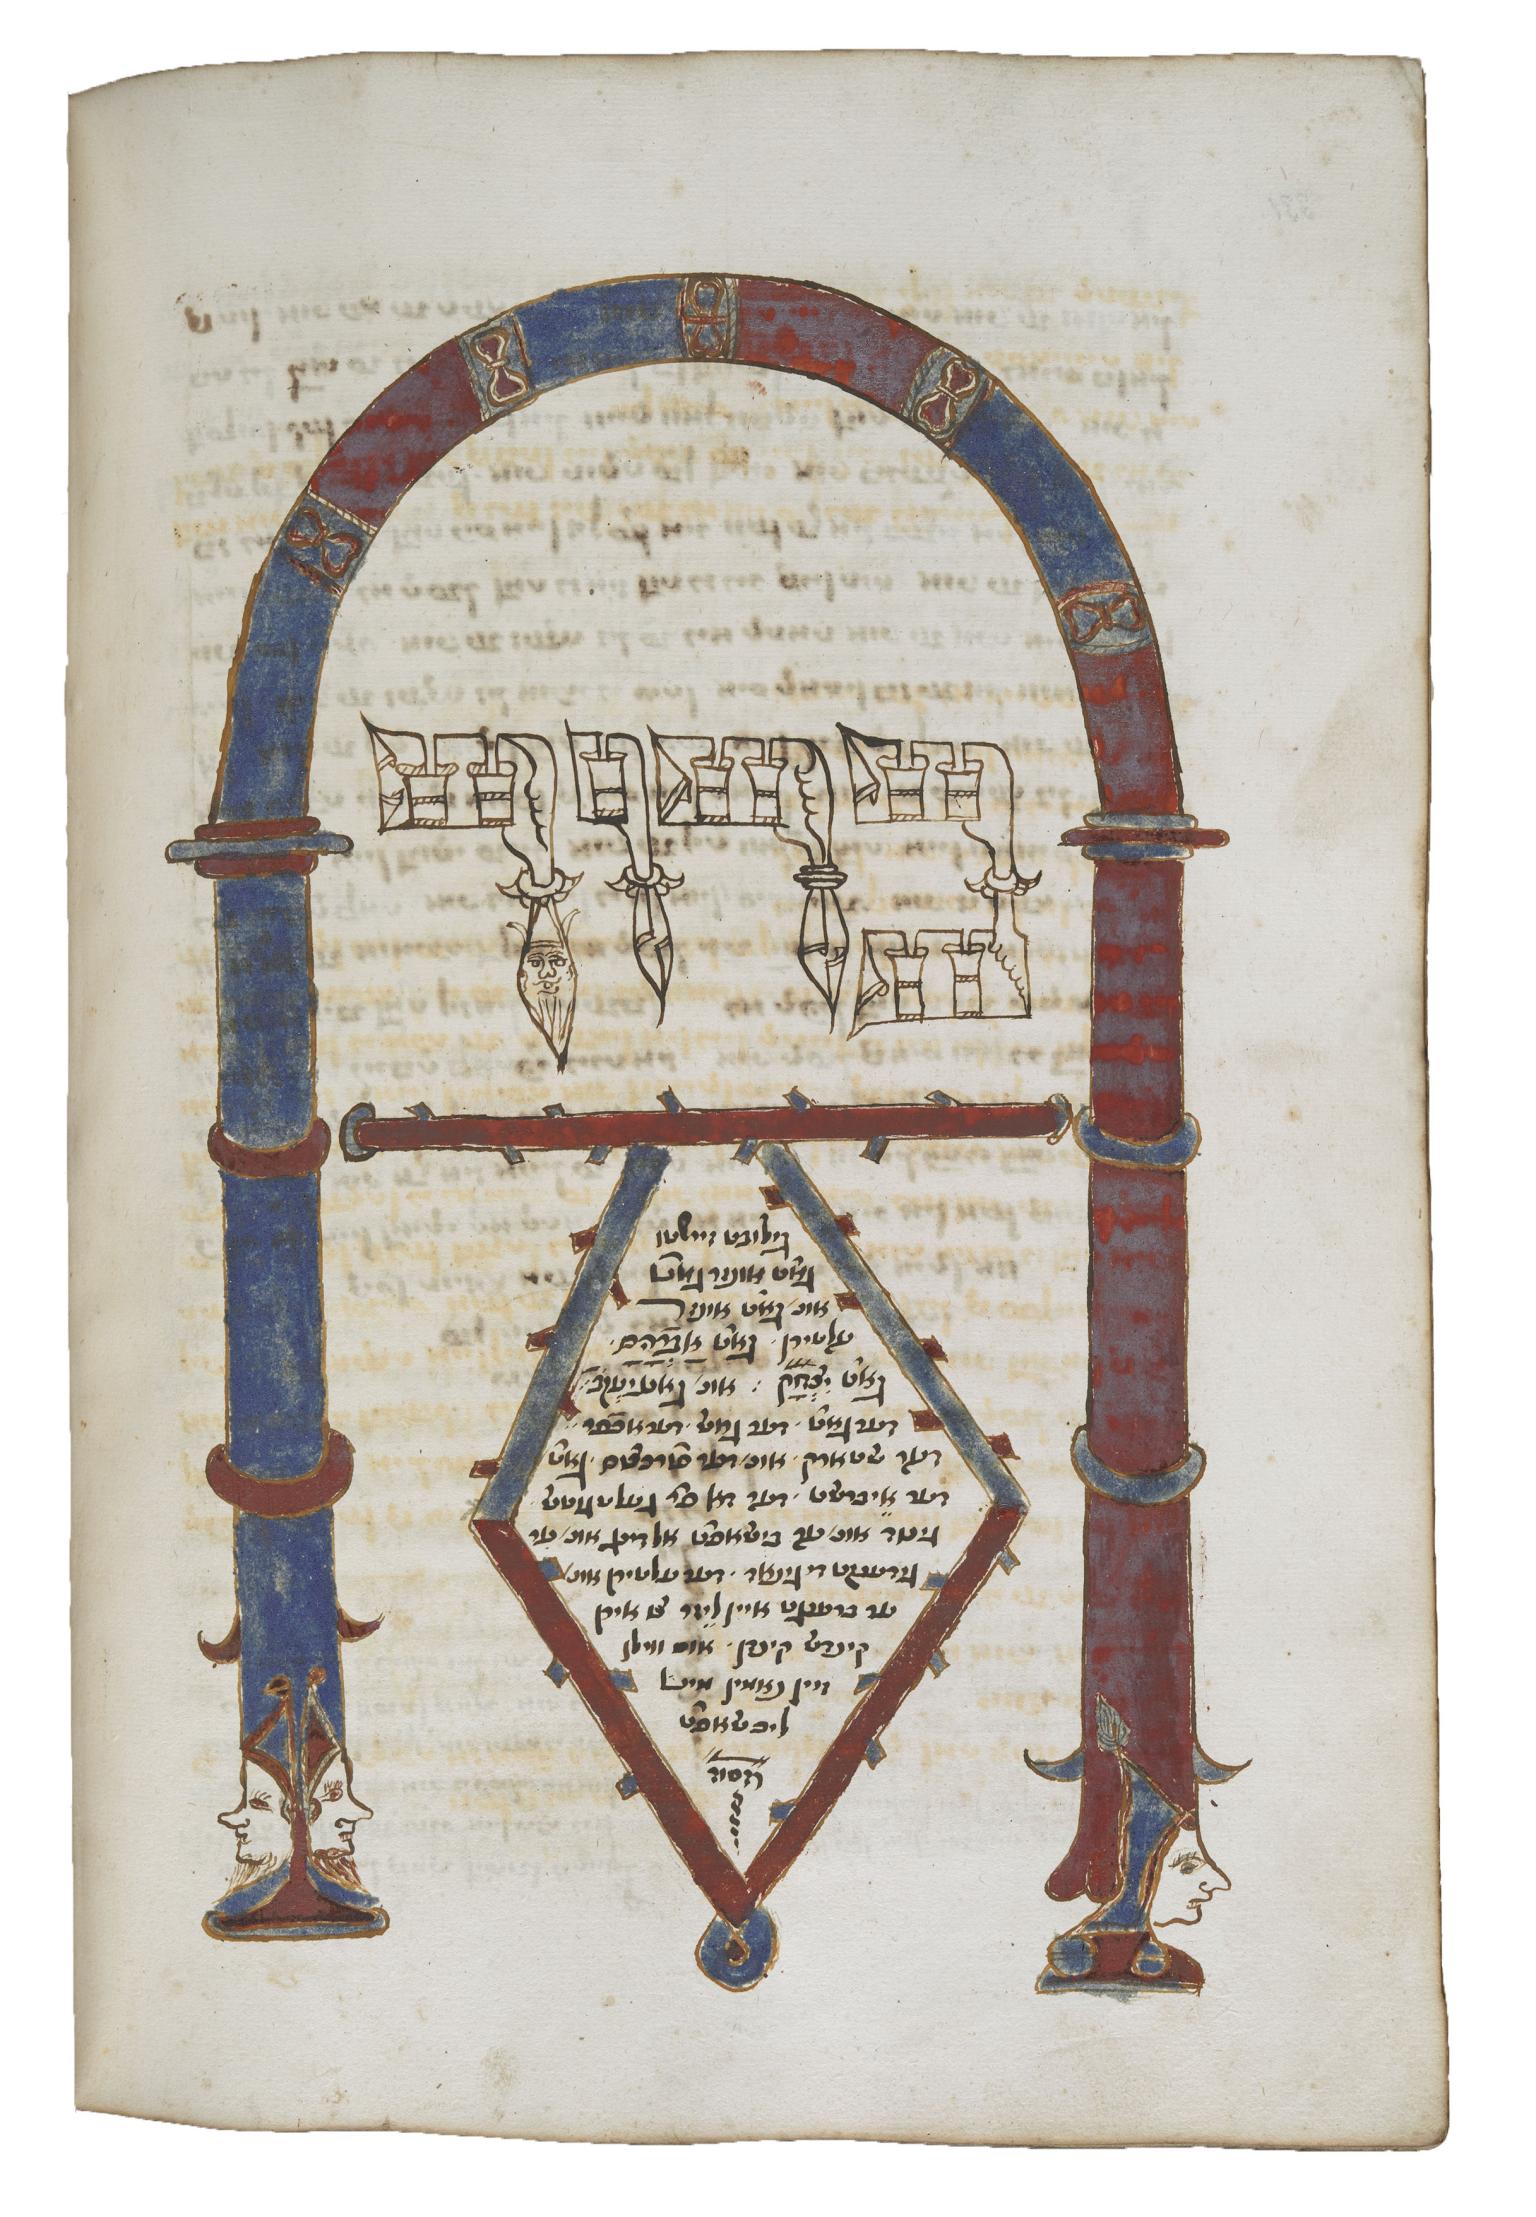 Manuscript page with Hebrew text in a diamond shape under an illustration of an archway, decorated with heads and flowers.